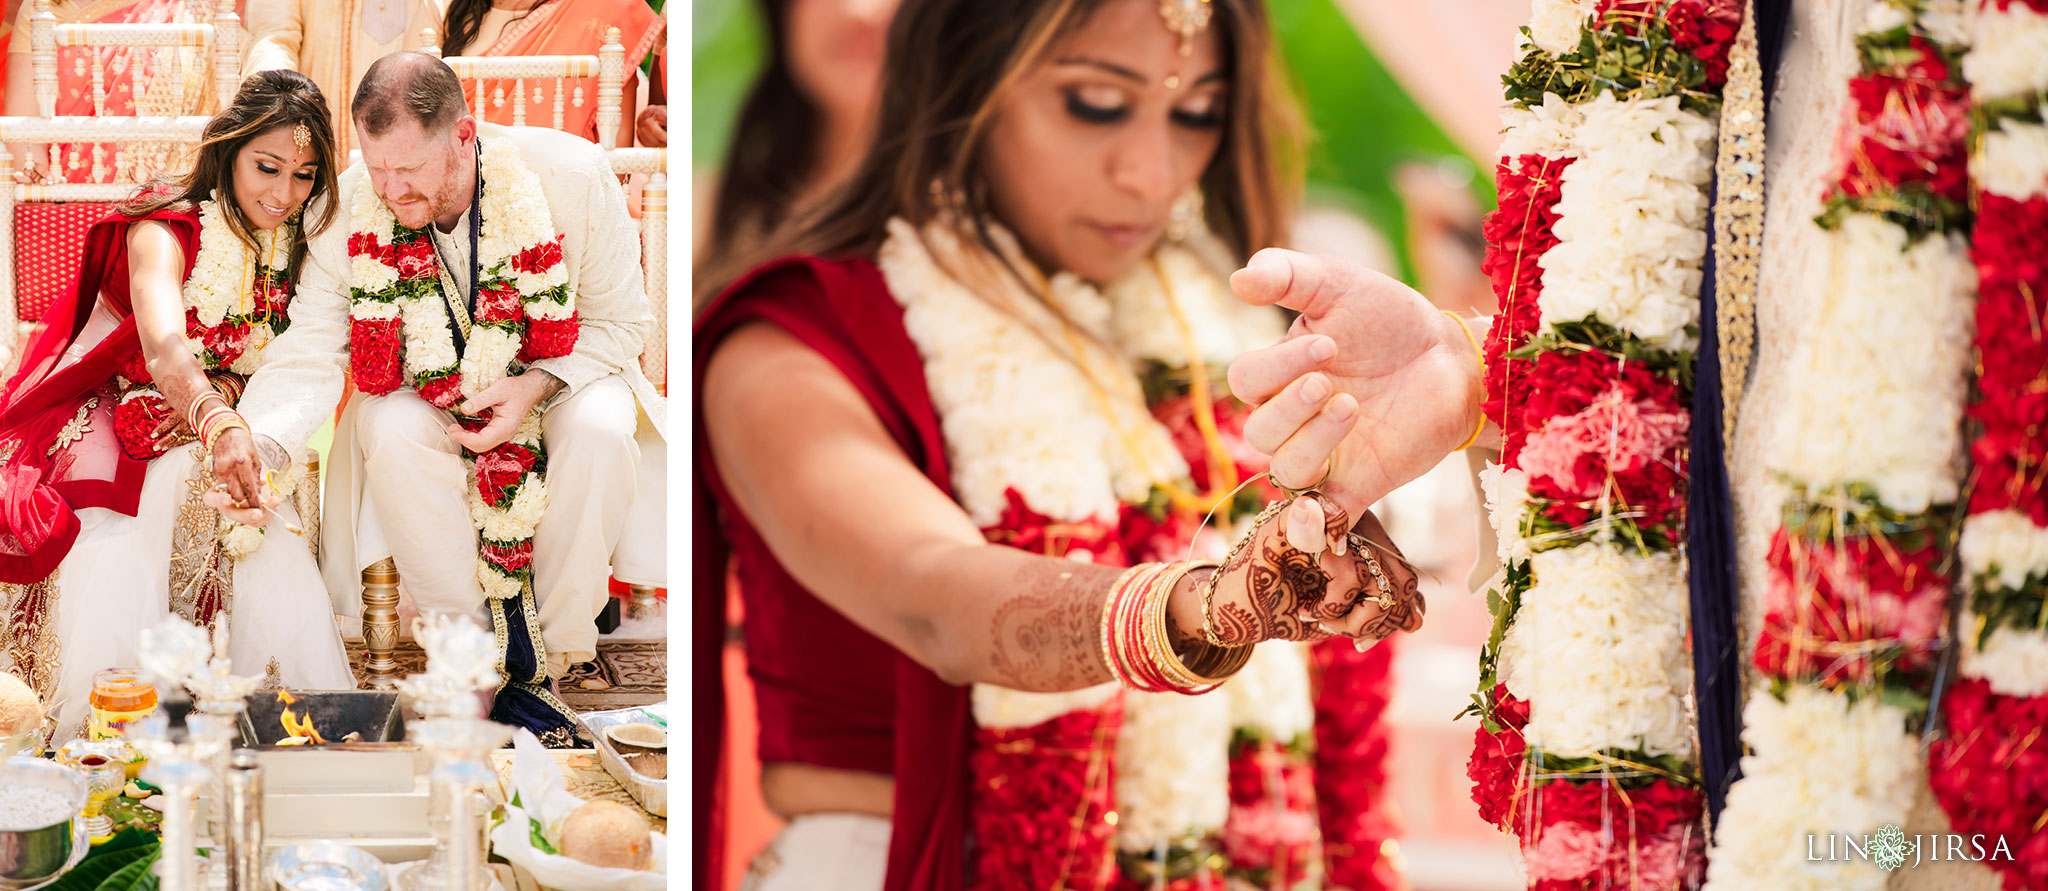 036 sherwood country club indian wedding ceremony photography